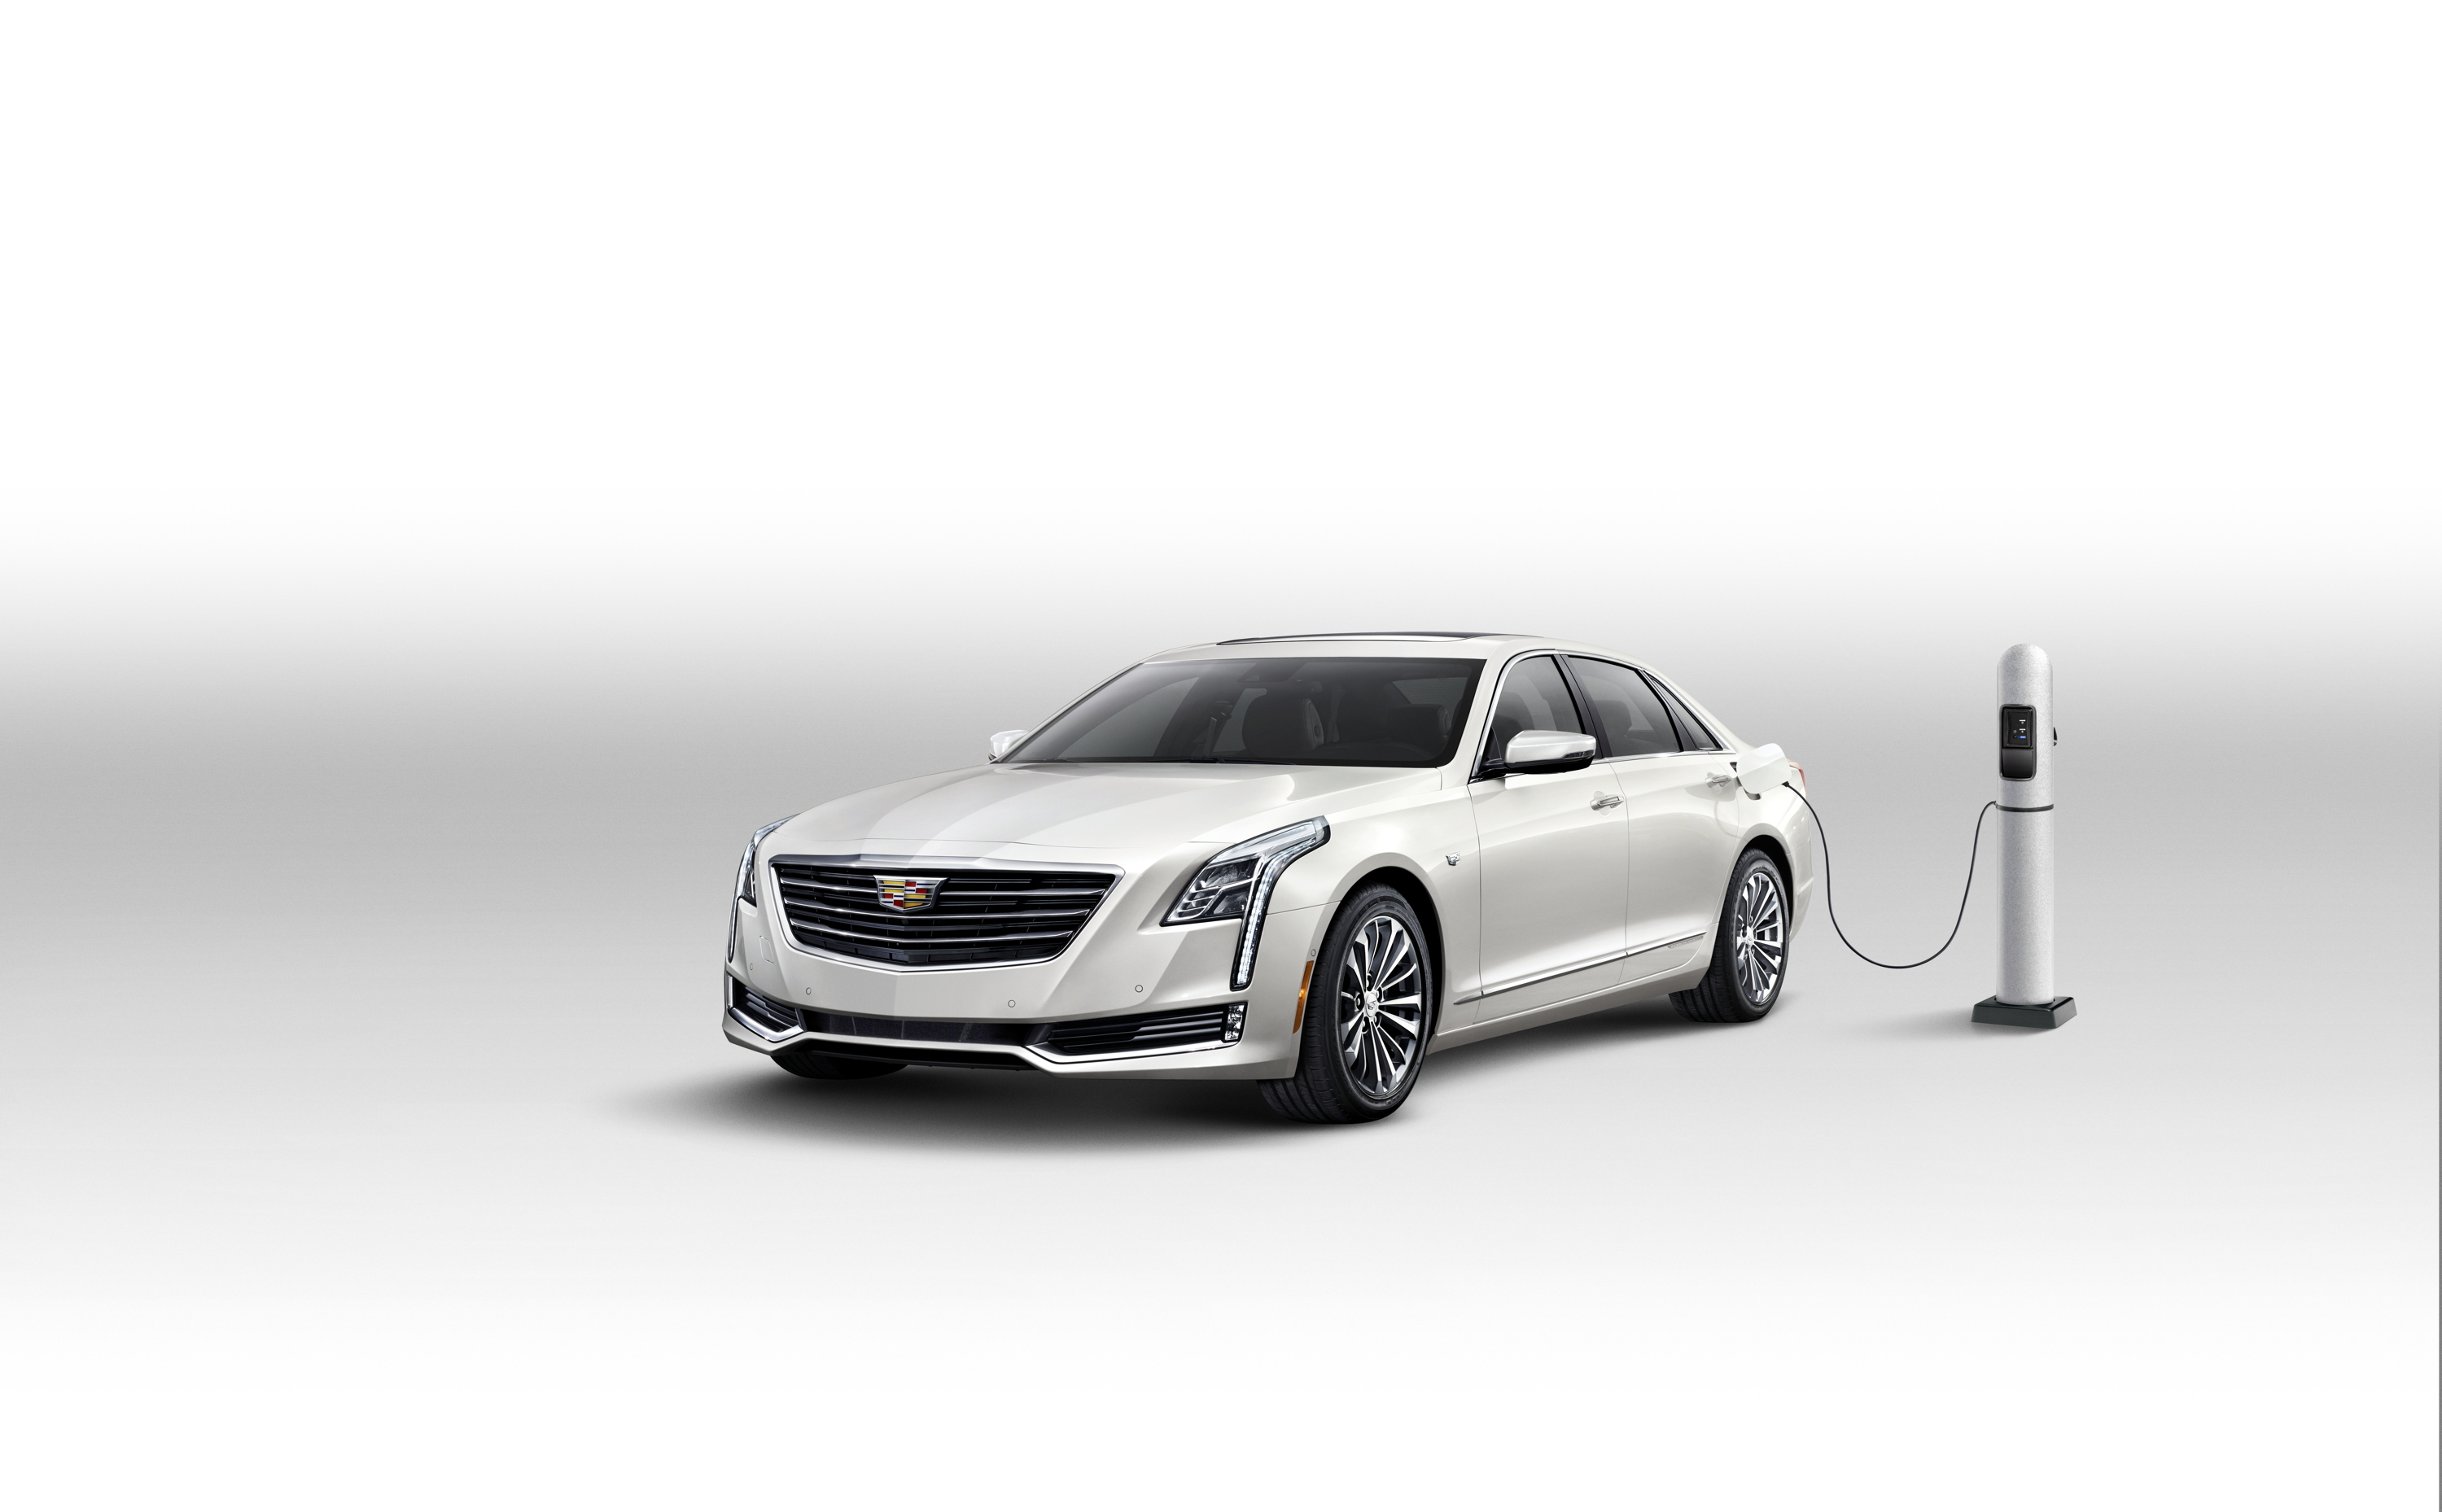 2017 Cadillac CT6 Plug-In on sale in spring 2017, offering an estimated  400-plus miles of total range